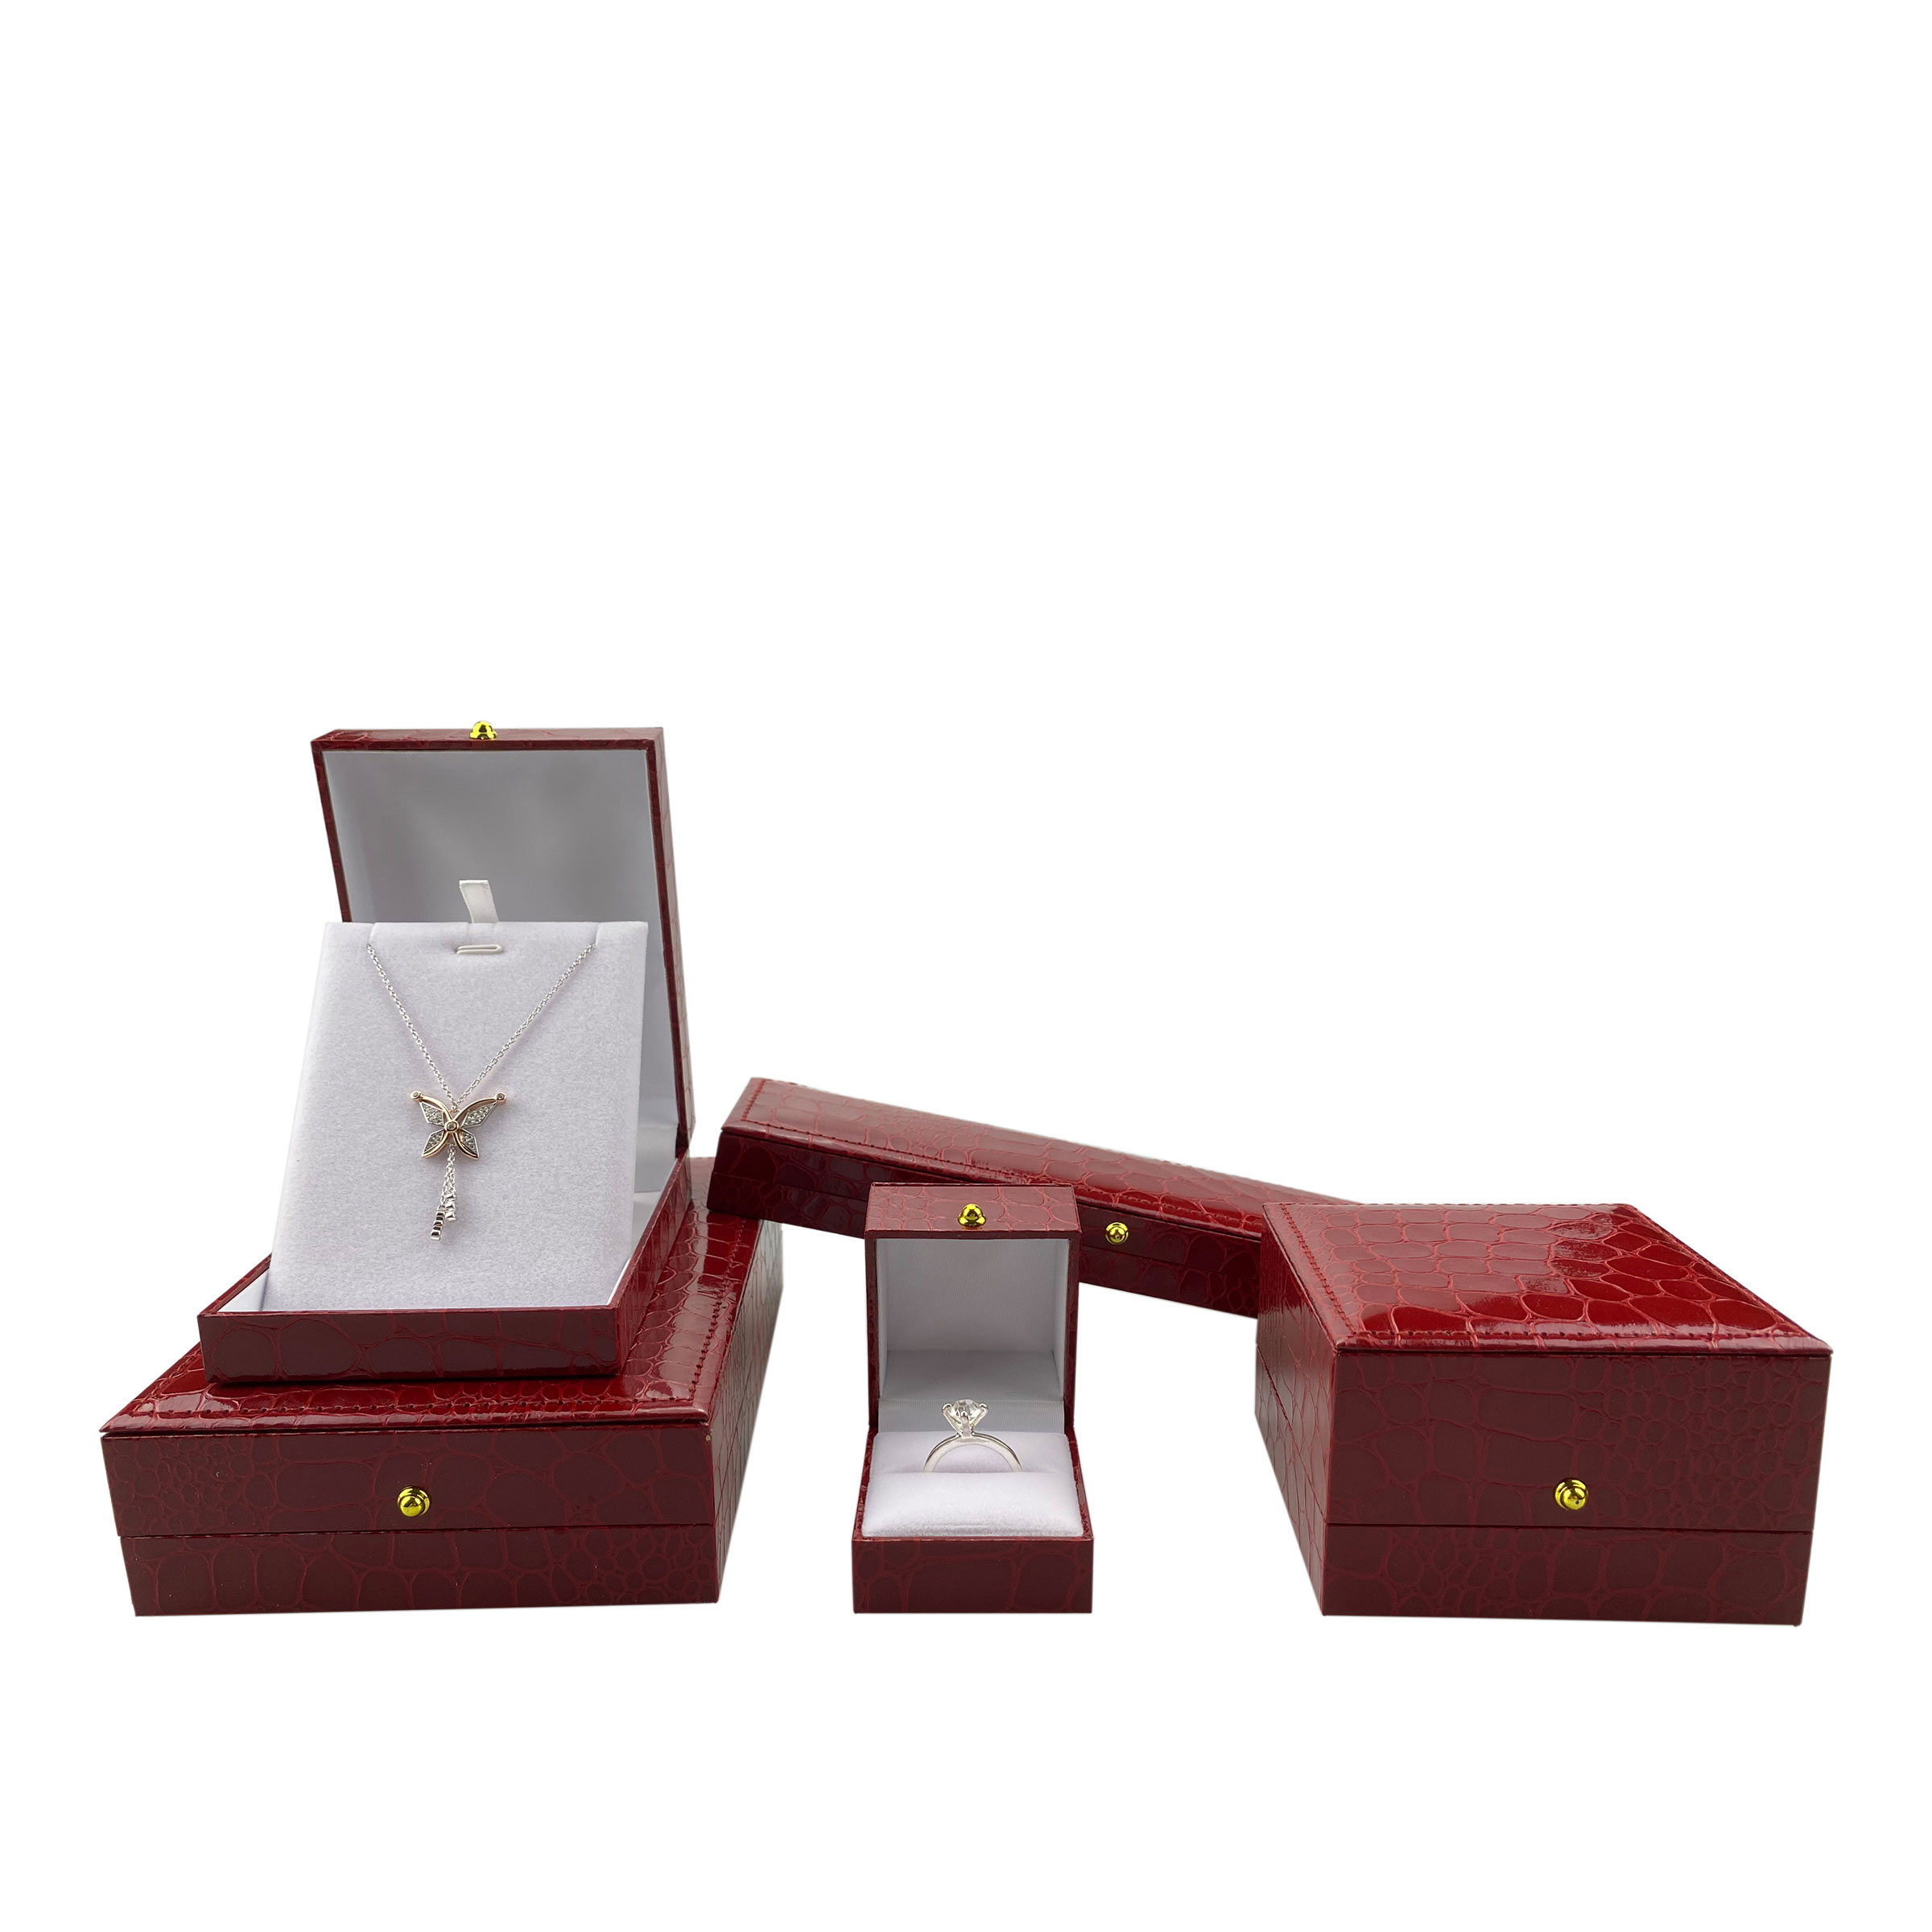 Are custom paper jewelry boxes the perfect solution for your business packaging needs?